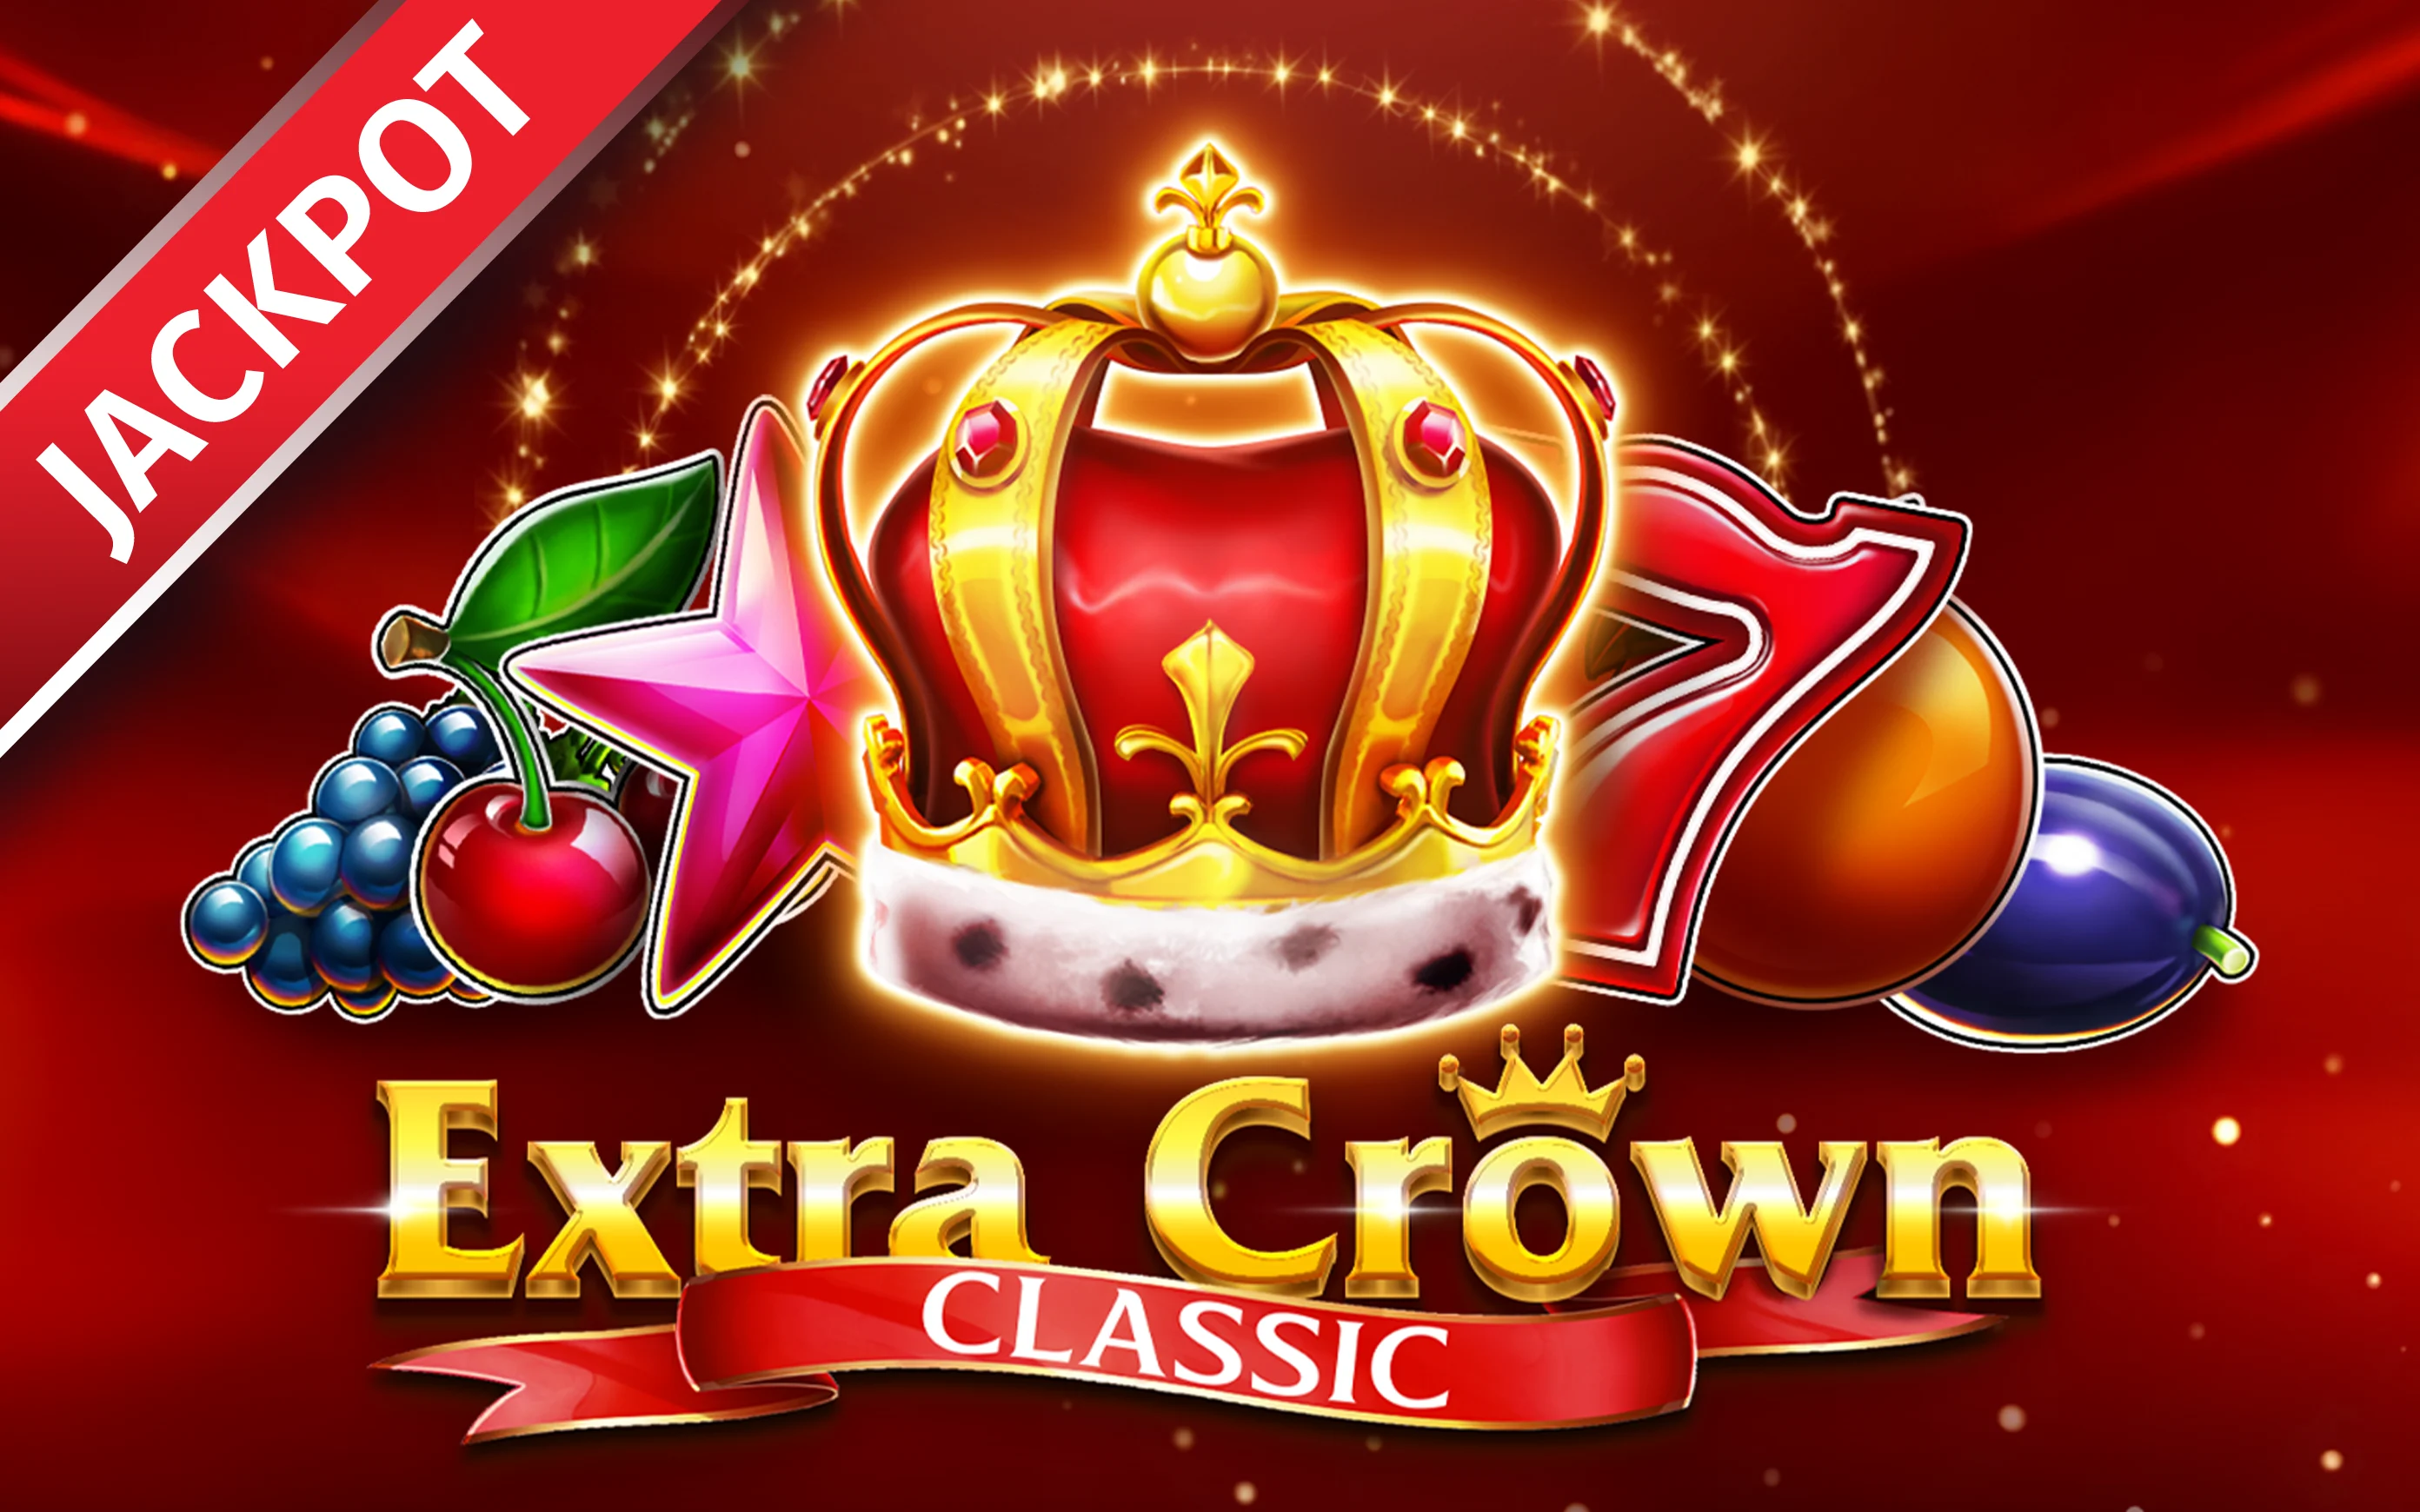 Spil Extra Crown Classic på Starcasino.be online kasino
